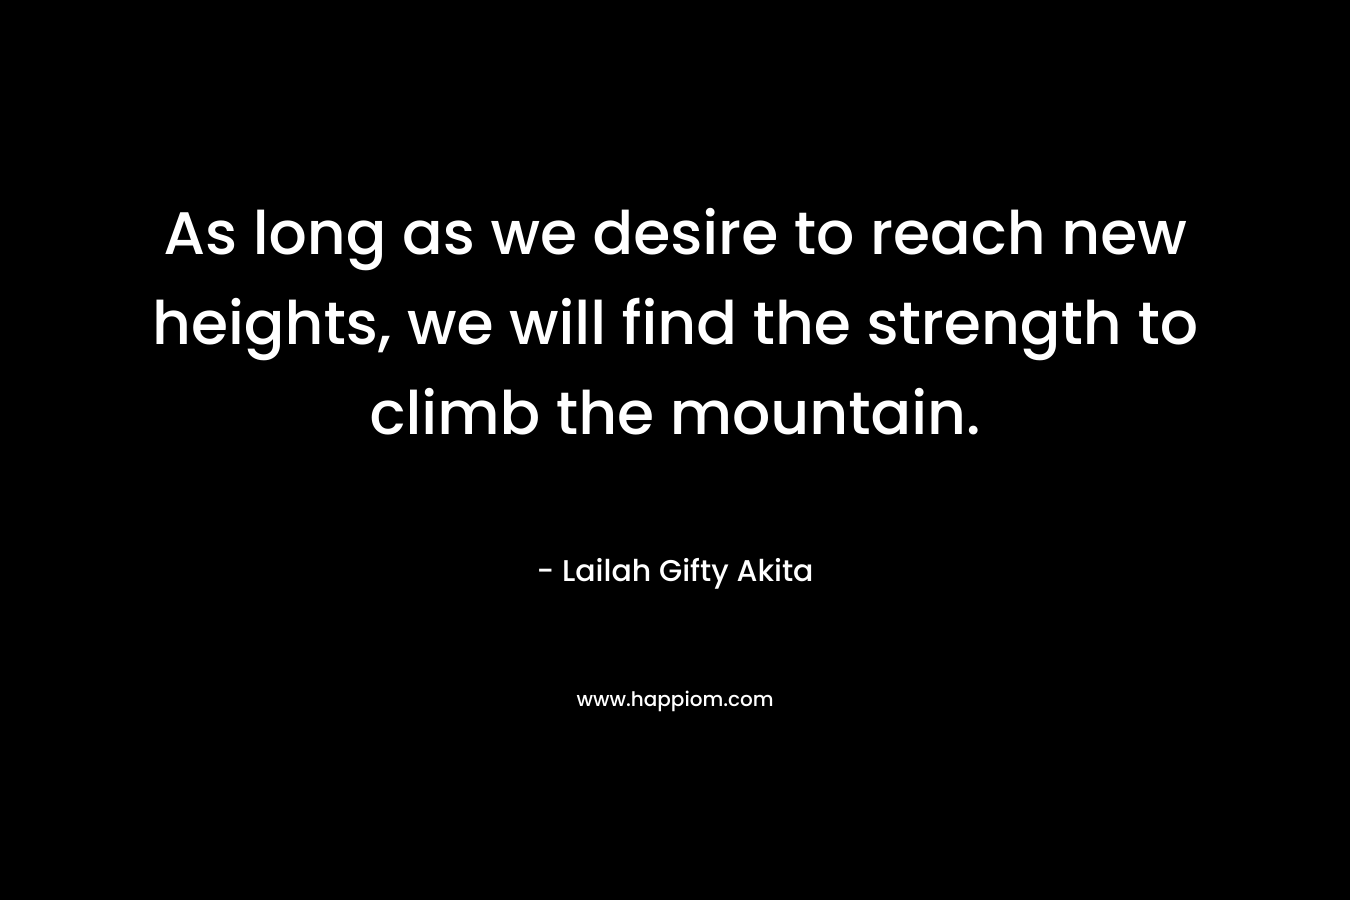 As long as we desire to reach new heights, we will find the strength to climb the mountain.